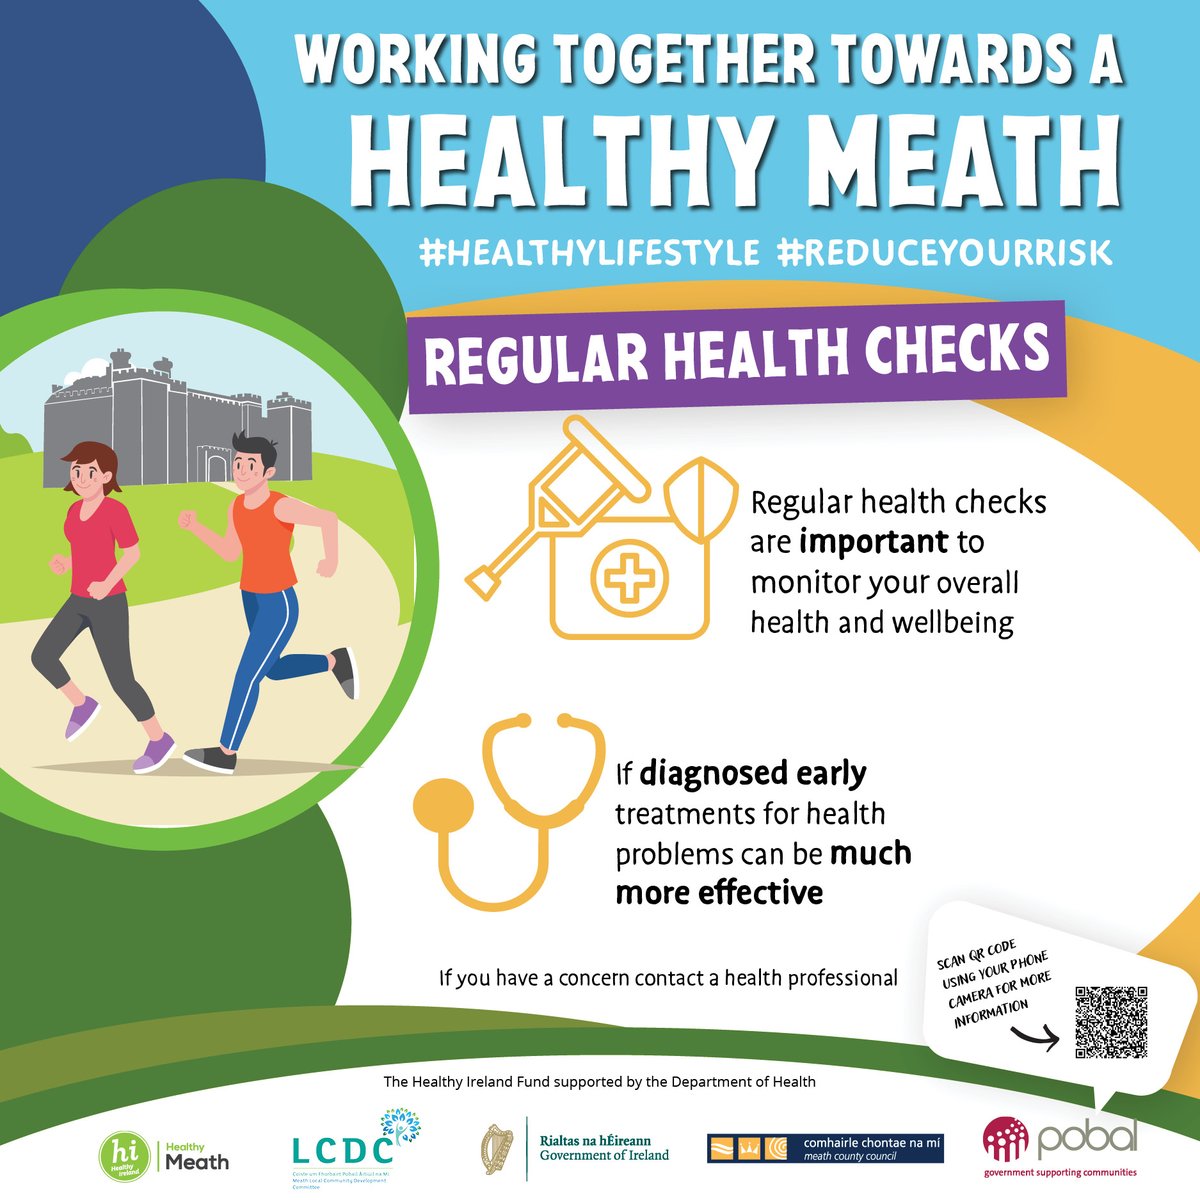 Having regular health checks can minimise your risk of developing a serious health issue. Contact a health professional if you are concerned. 

For more info contact healthymeath@meathcoco.ie or visit bitly.ws/35Q3d 

#HealthyMeath #HealthyLifestyle #ReduceYourRisk